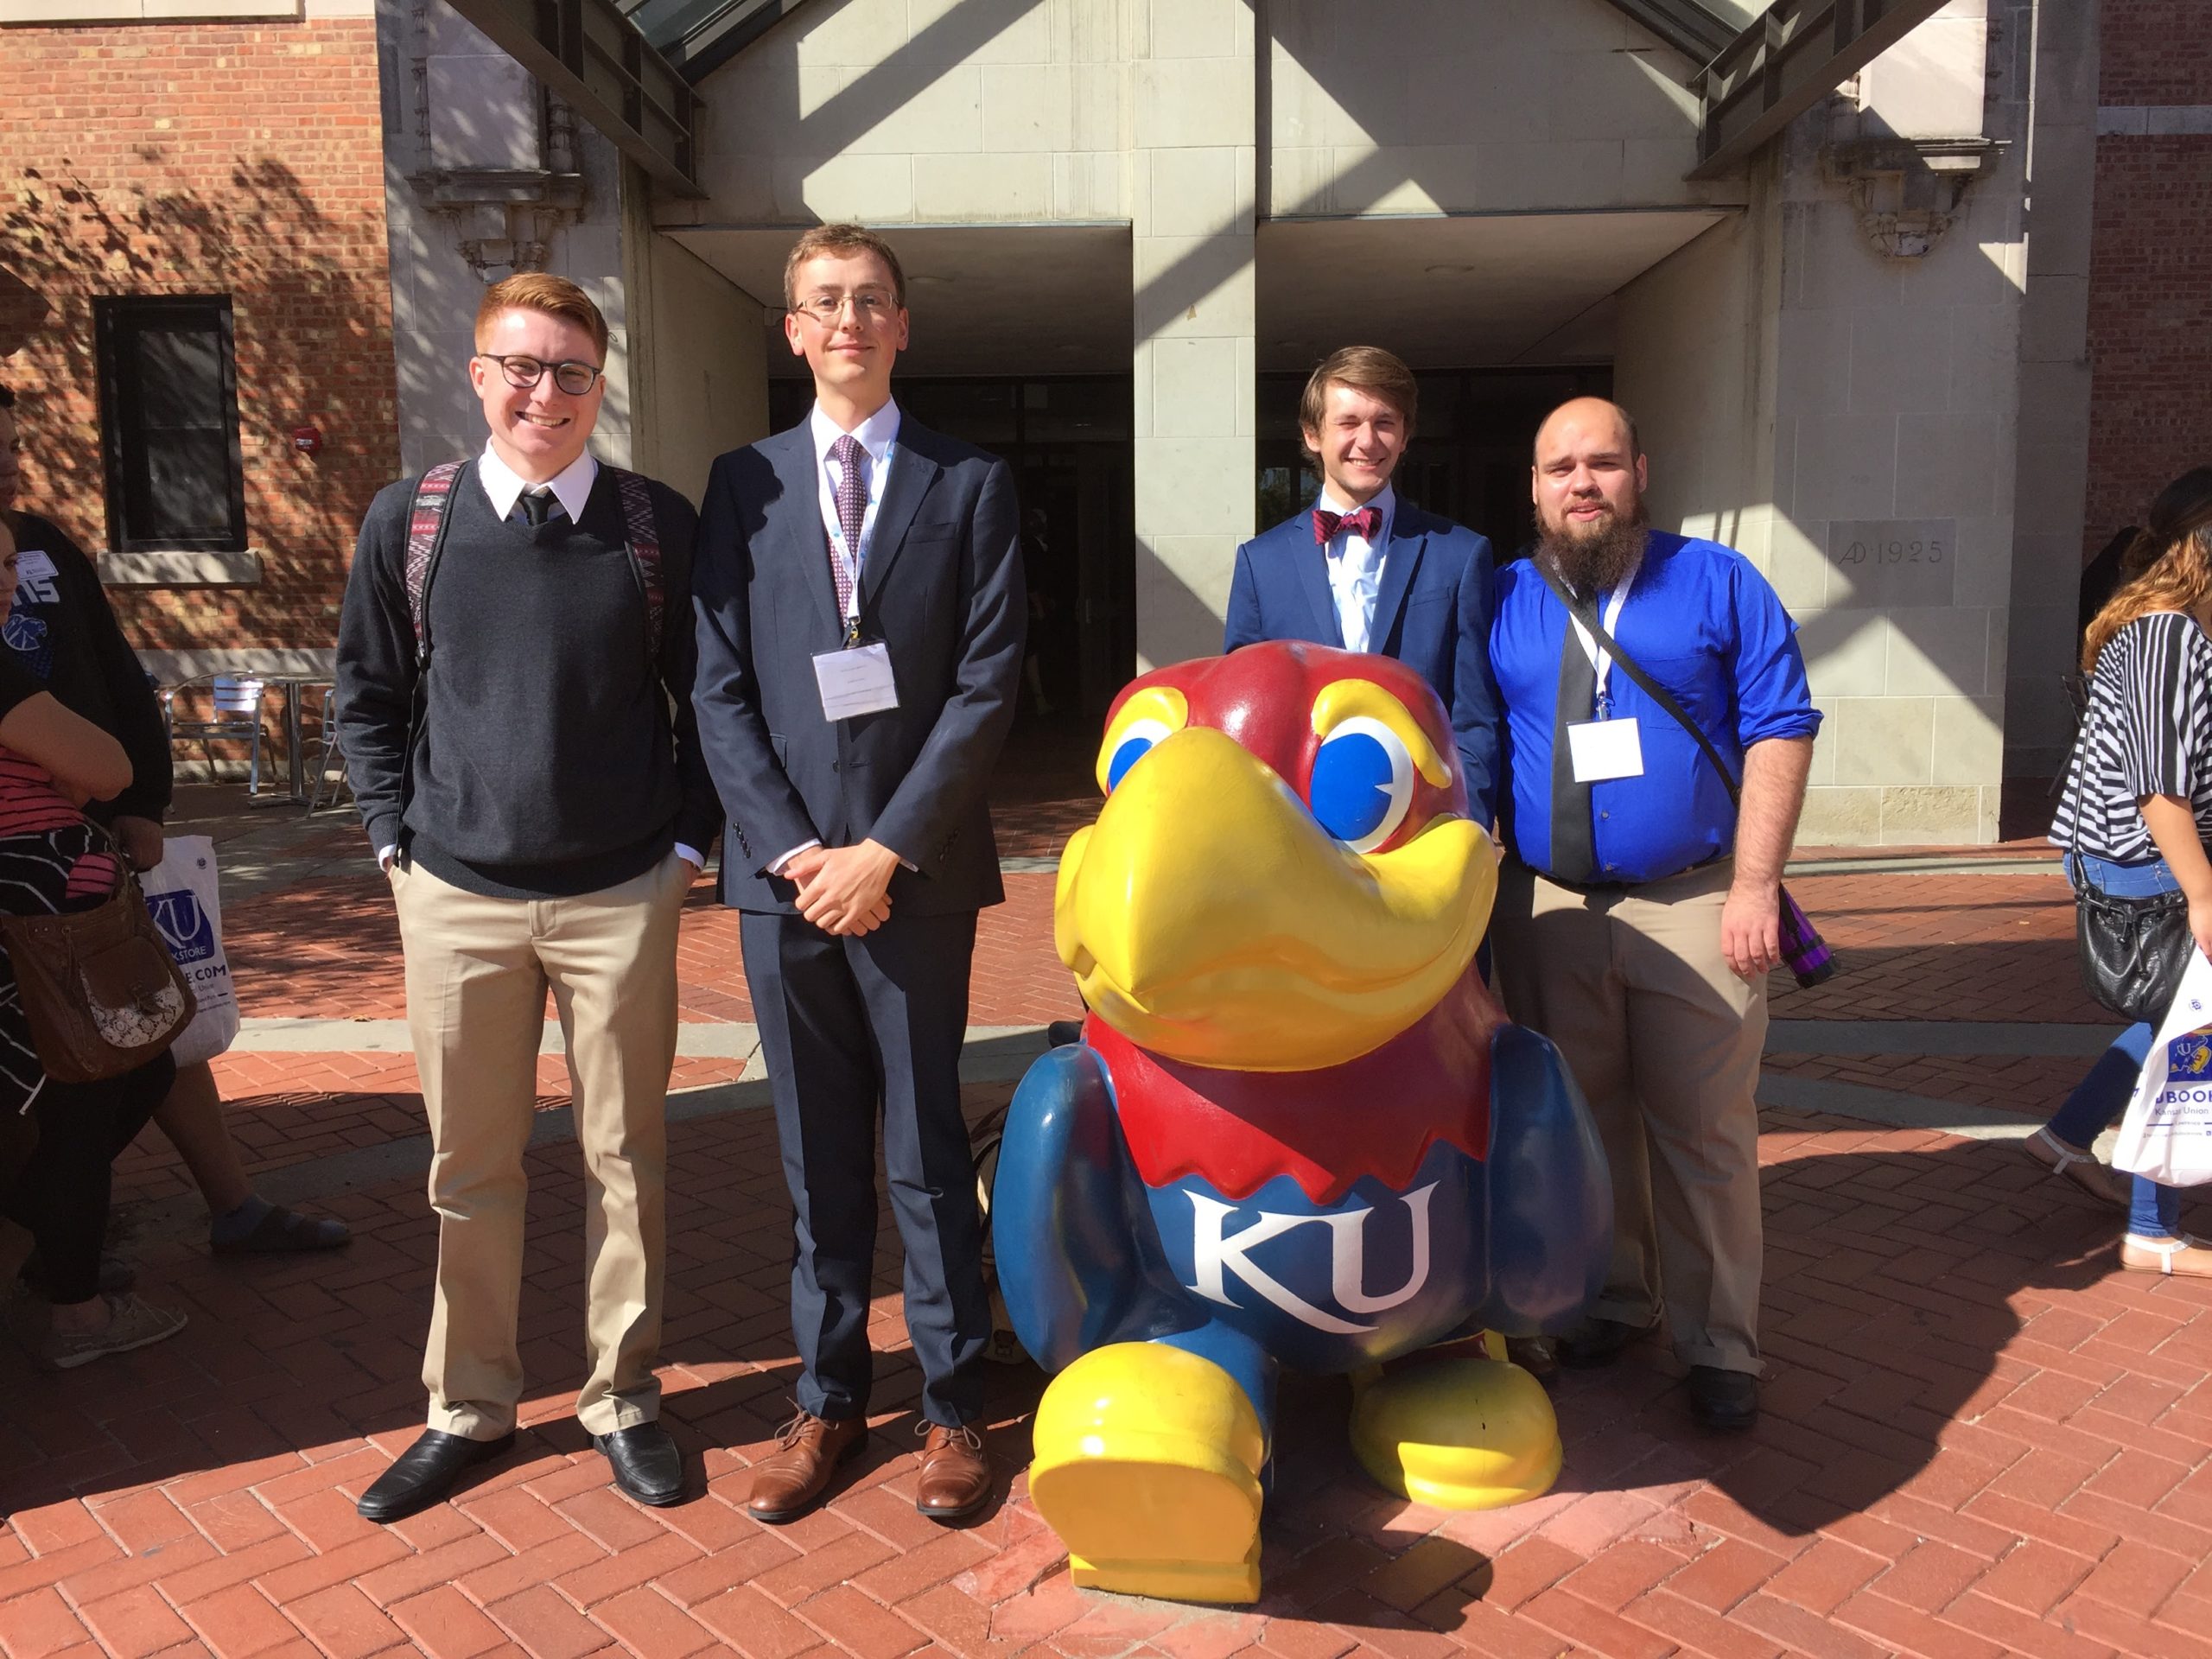 The conference was held on campus at the University of Kansas in Lawrence